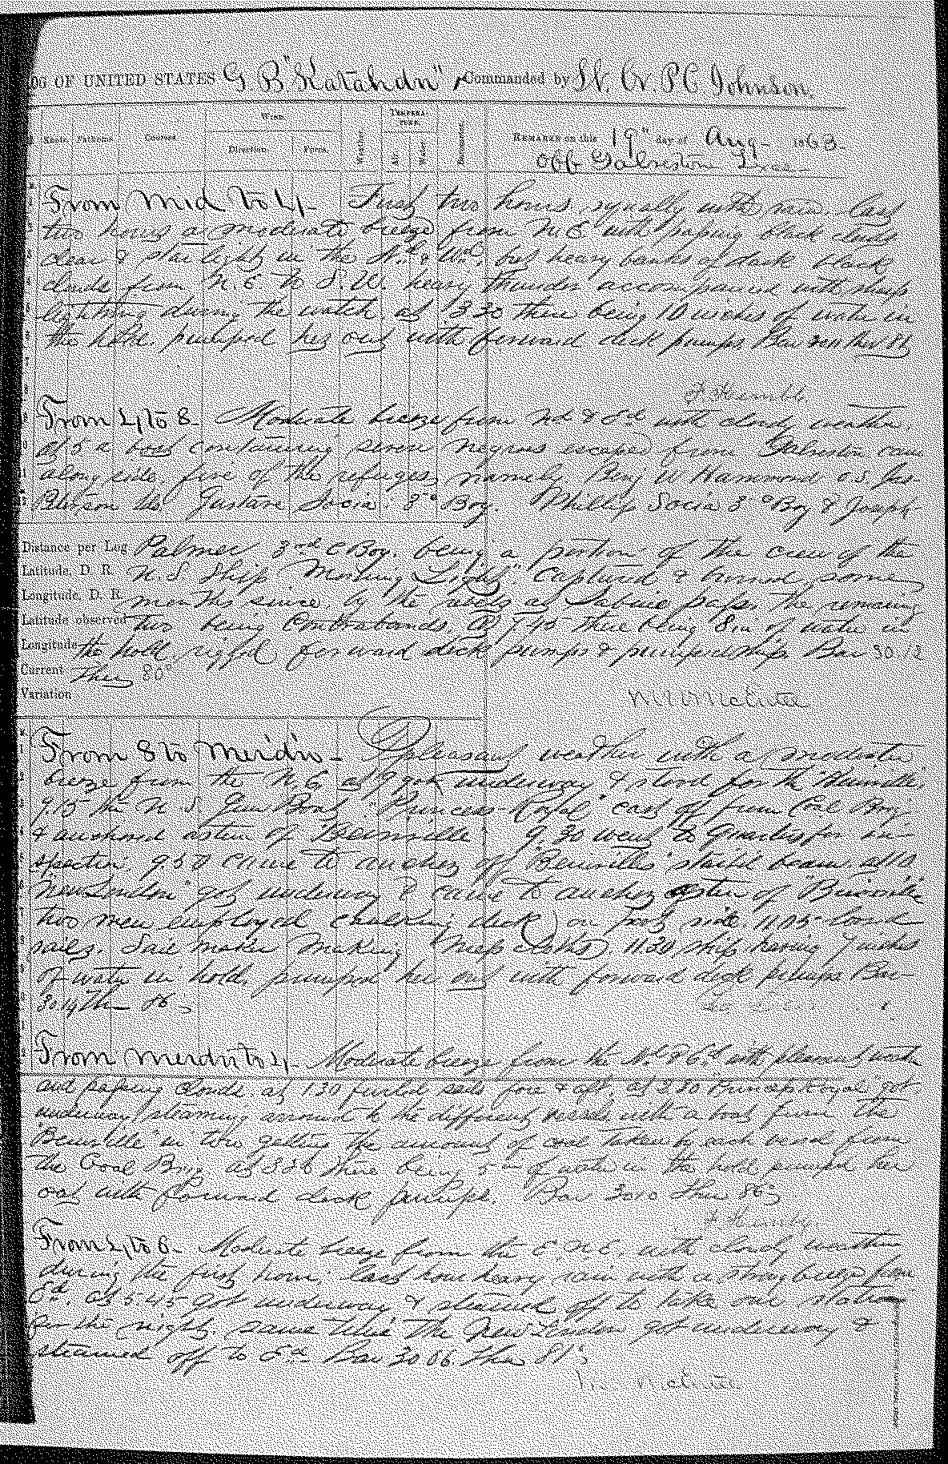 On August 19, 1863, Benjamin  Drummond escaped from his Confederate captors 
and rowed out into the Gulf of Mexico where he was taken aboard the USS Gunboat Katahdin. 
The logbook of the Katahdin noted that Drummond was one of the  former crewmembers of 
the U.S.S. Morning Light, that had been captured and burned some months since. This is a 
digital copy of the original held by the National Archives.